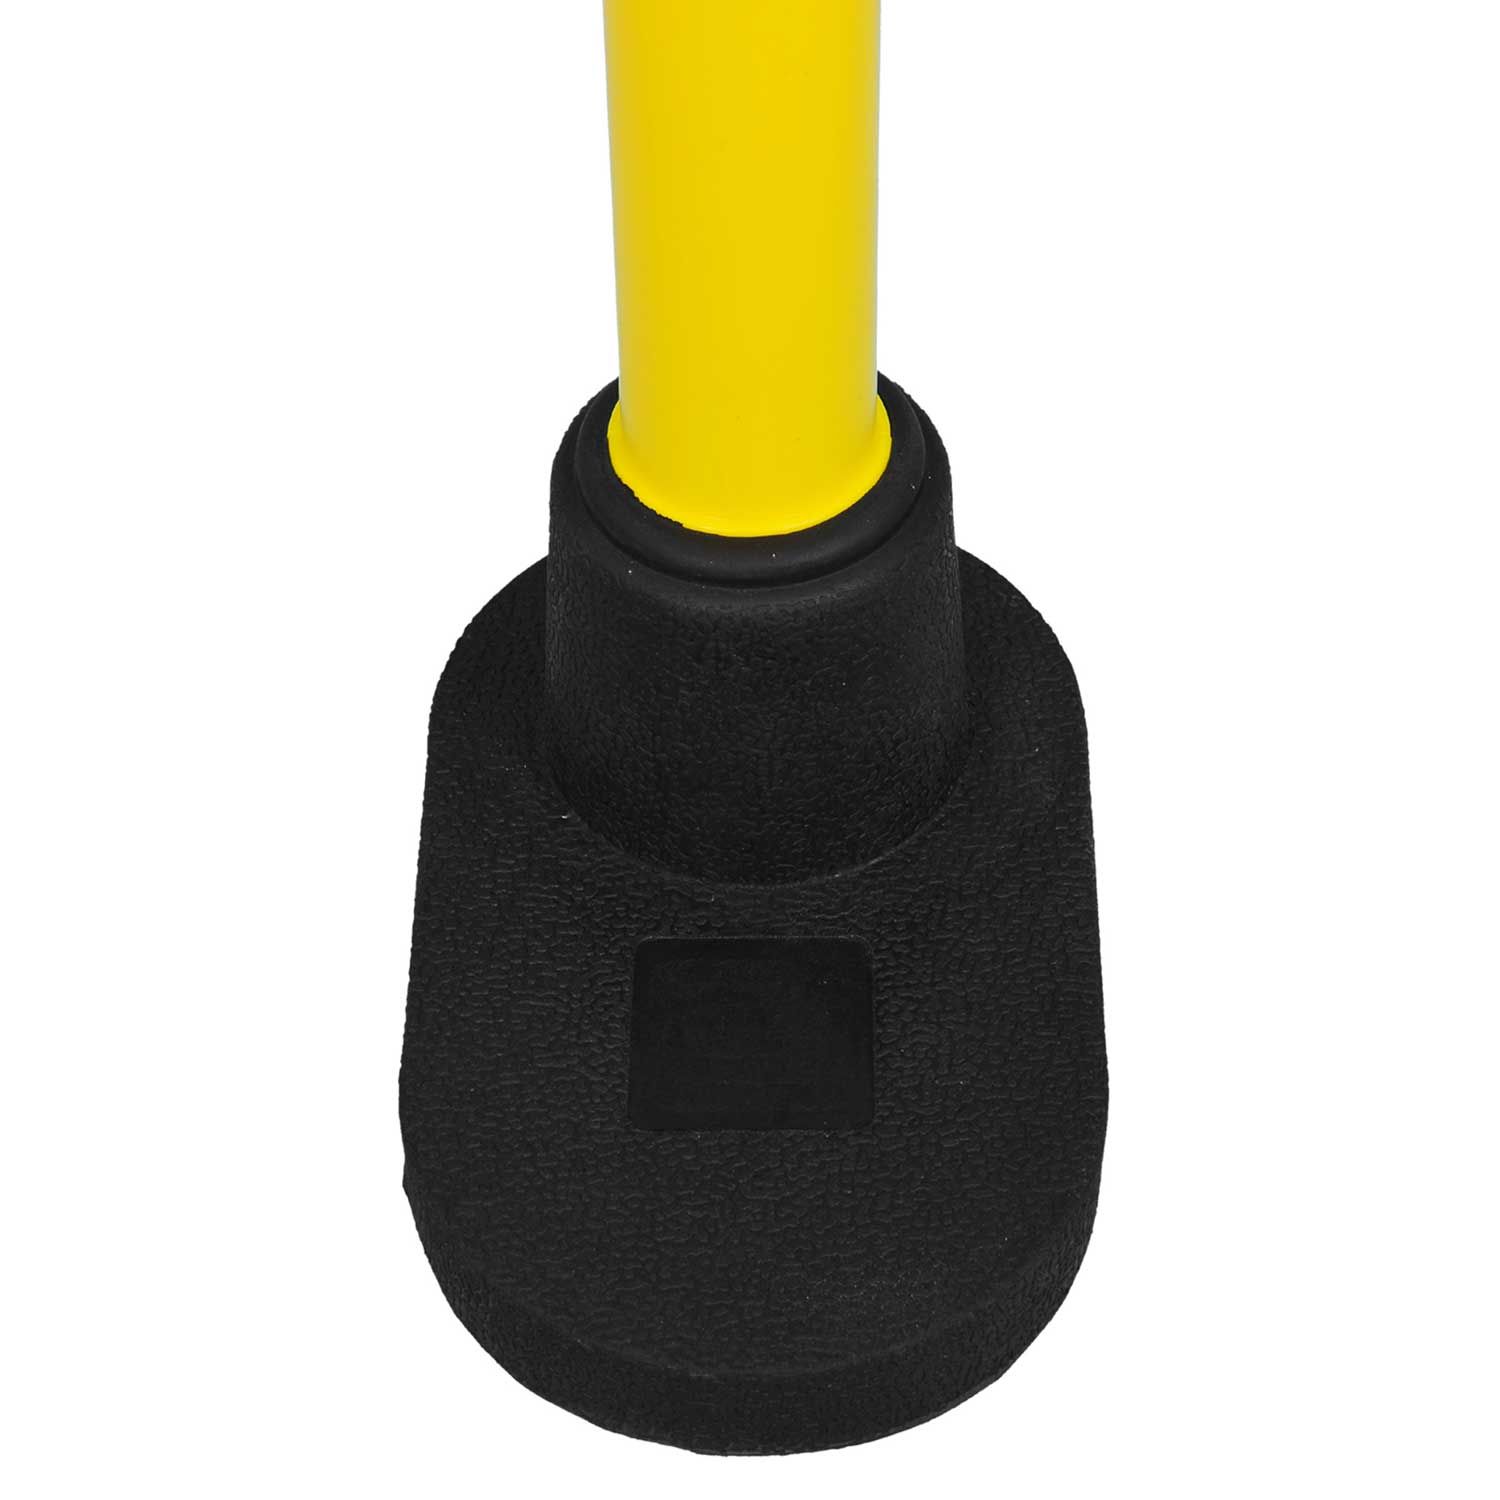 Plastic Target Stumps with Rubber Base